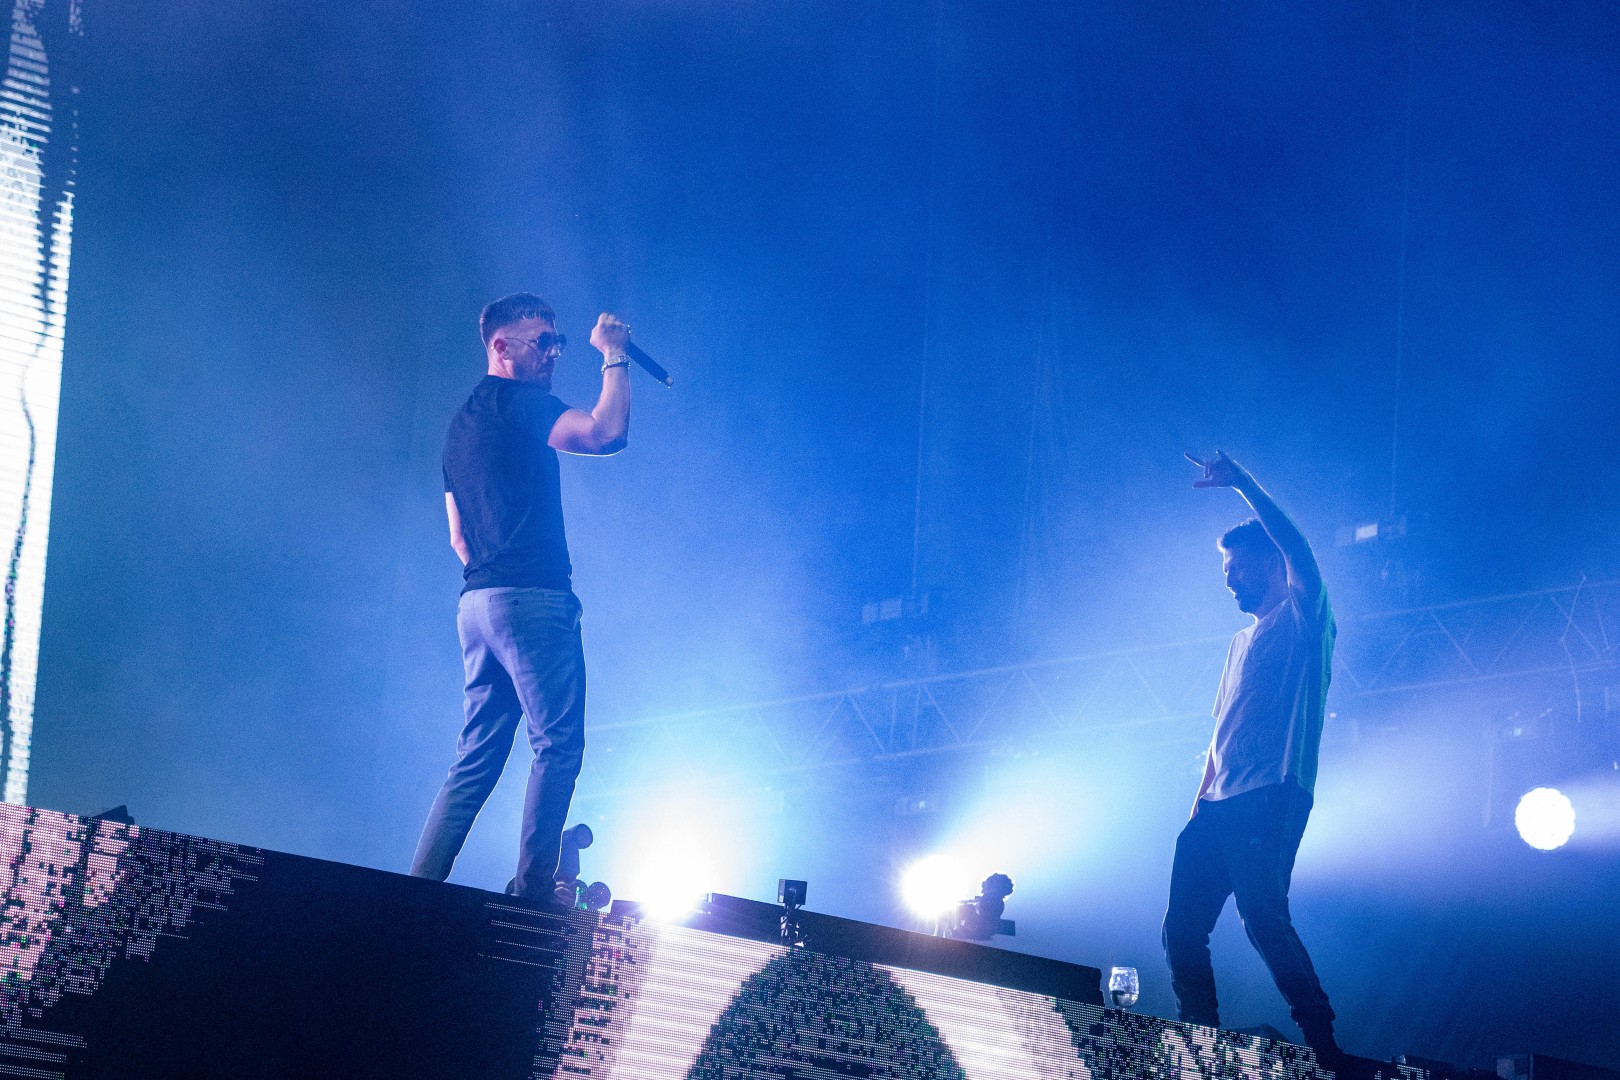 Dimitri Vegas & Like Mike at Cluj Arena in Cluj-Napoca on August 6, 2022 (f5a38c3844)